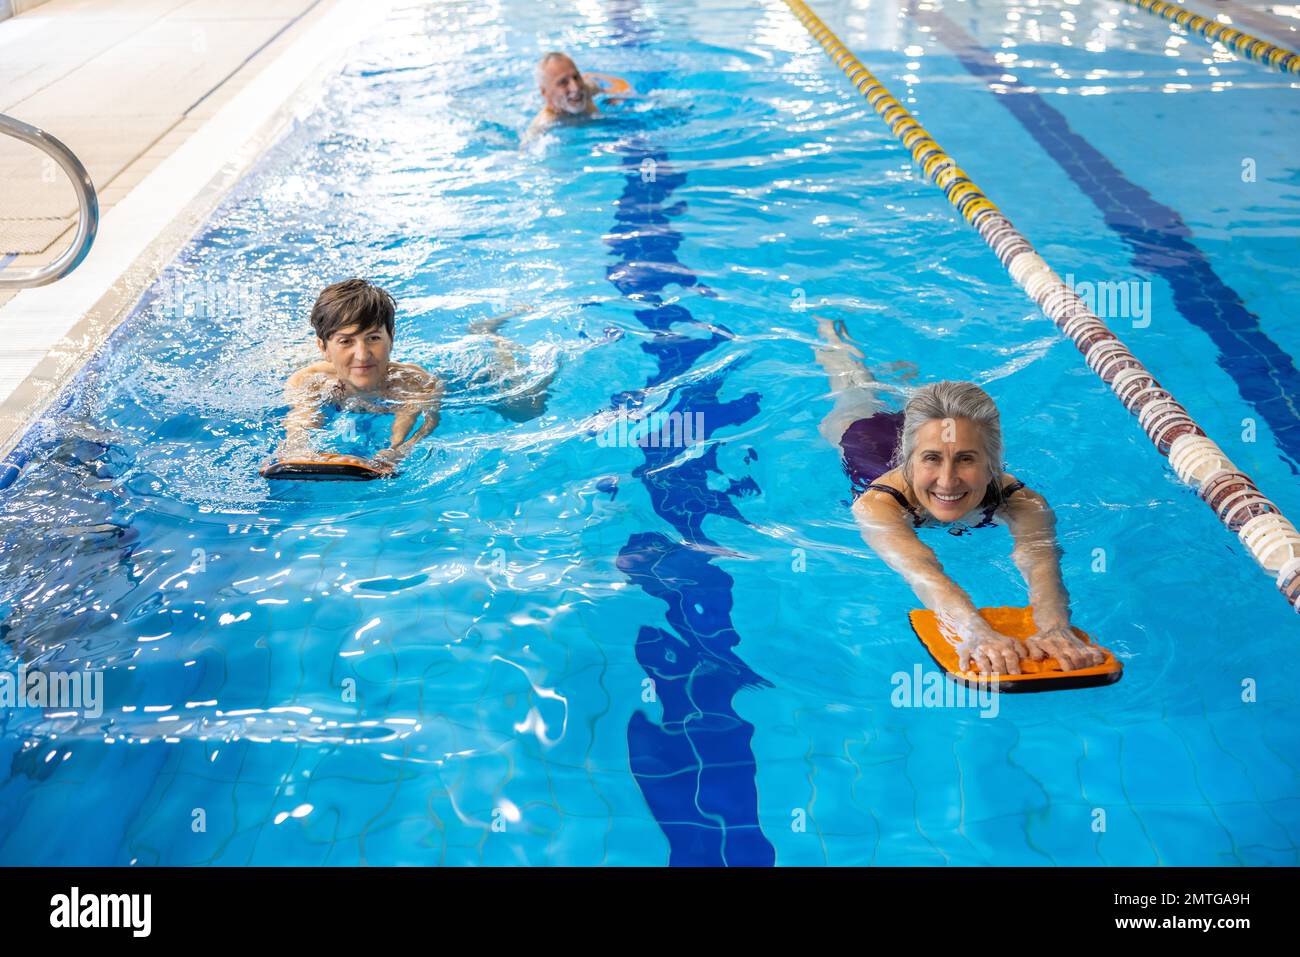 Group of people swimming in the swimming pool and looking enjoyed Stock Photo